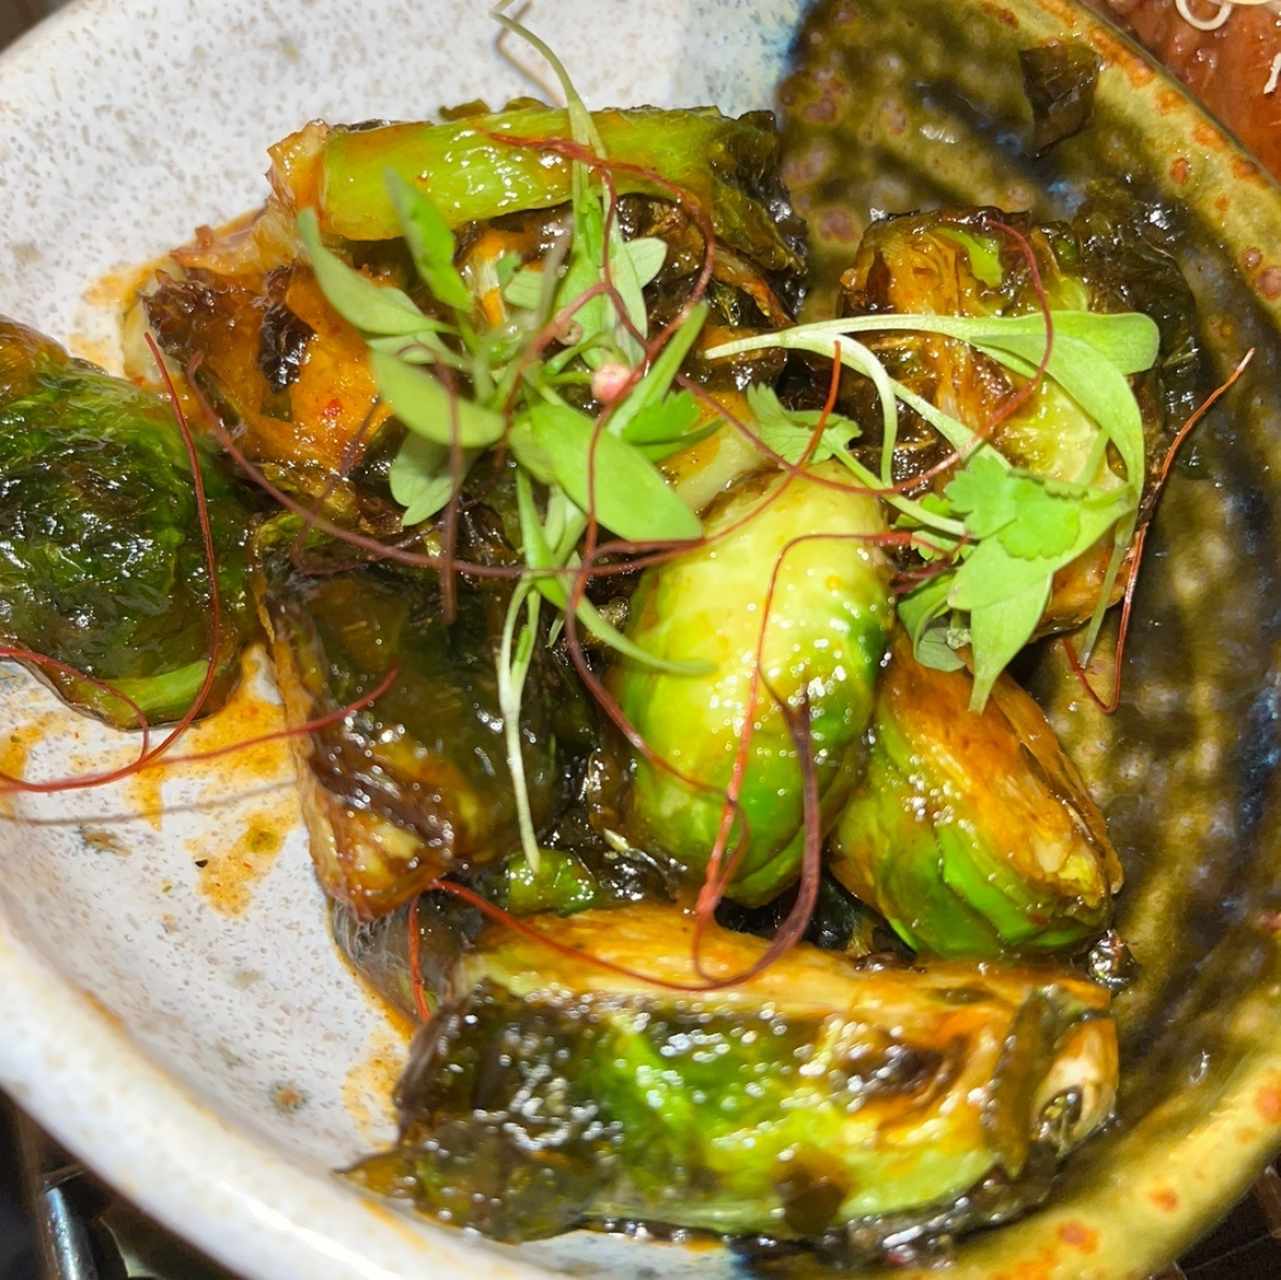 Robata Farm - Brussels Sprouts